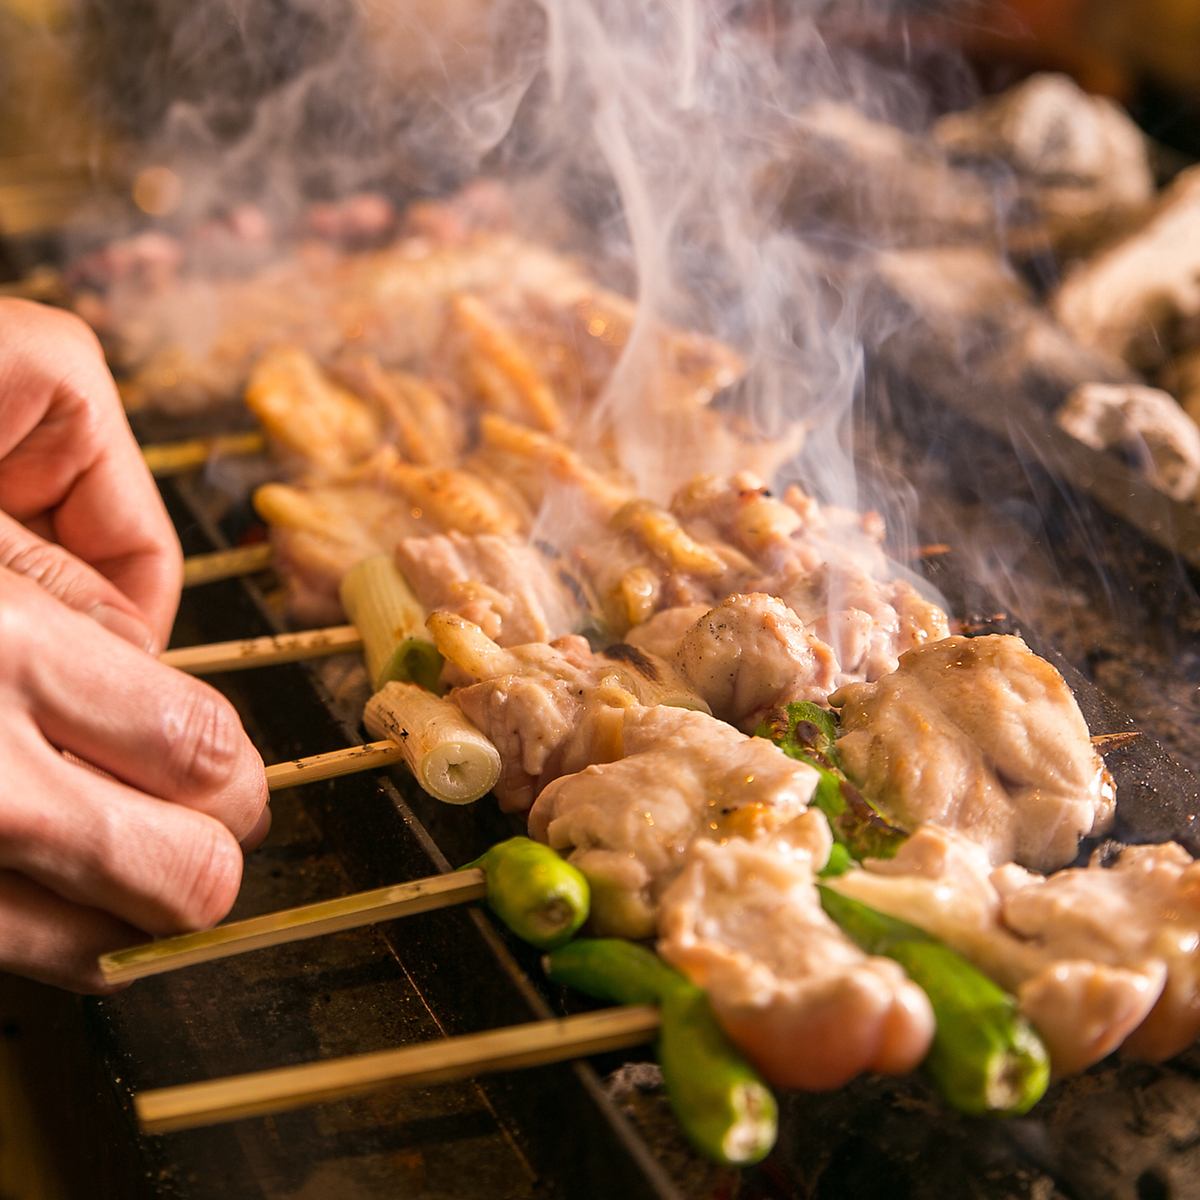 The yakitori, which uses carefully selected chicken and is carefully grilled with Bincho charcoal, is exquisite ♪